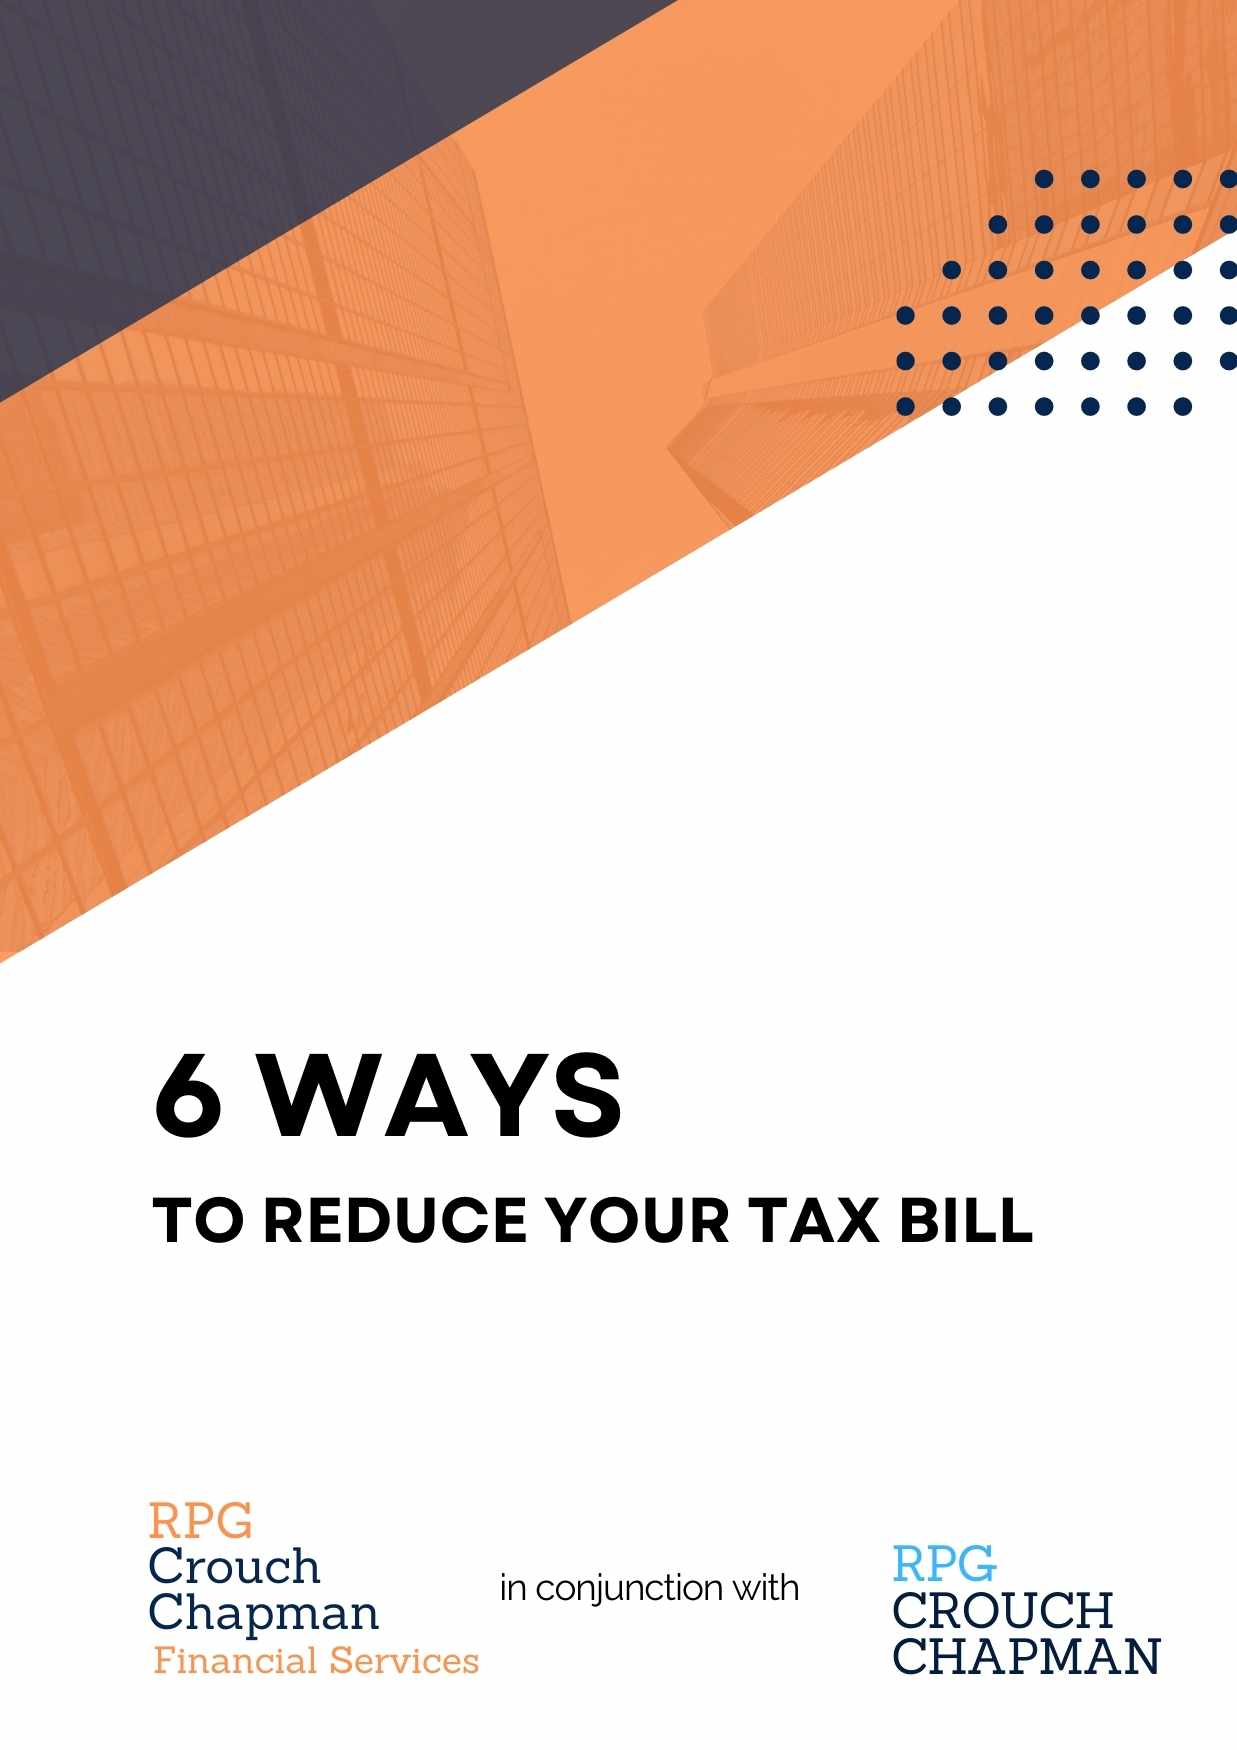 6 ways to reduce your tax bill 